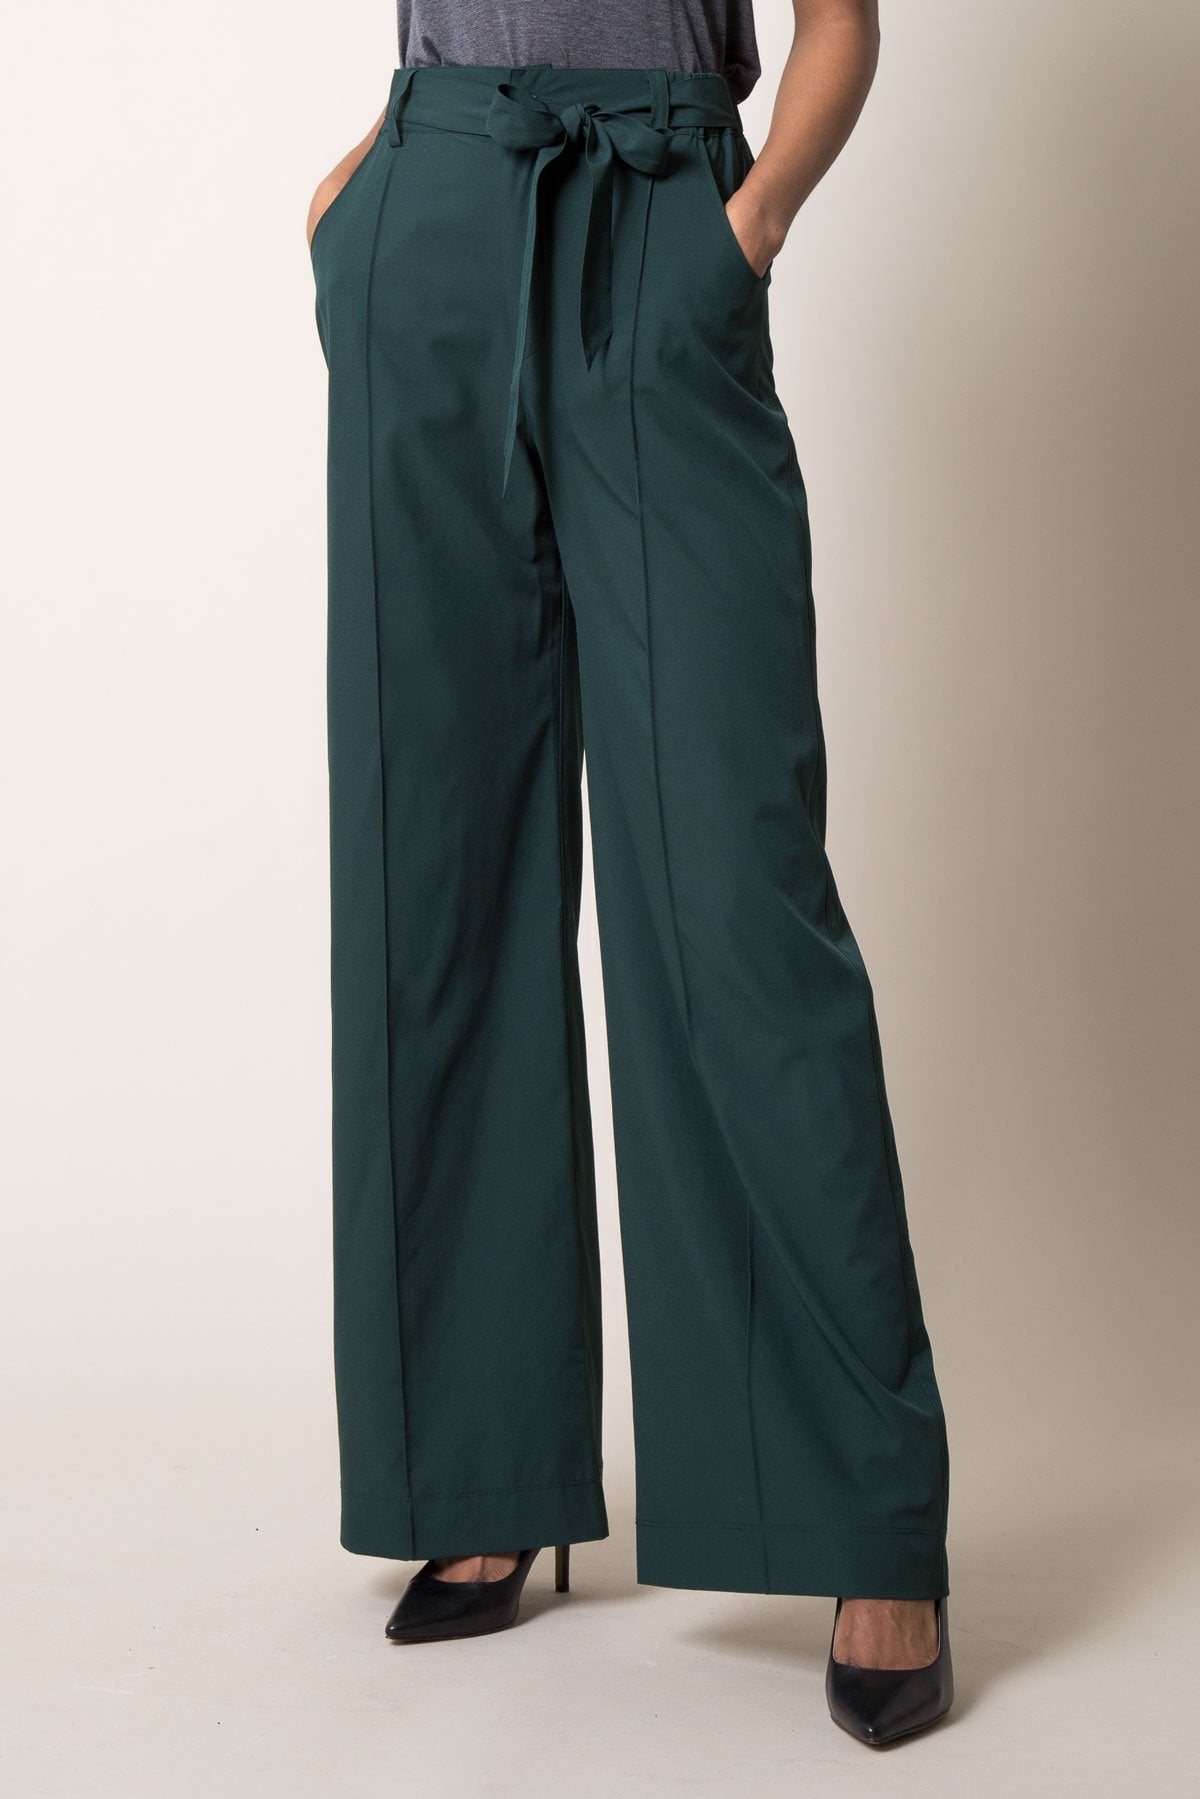 About Town Wide Leg Pant – MPG Sport Canada